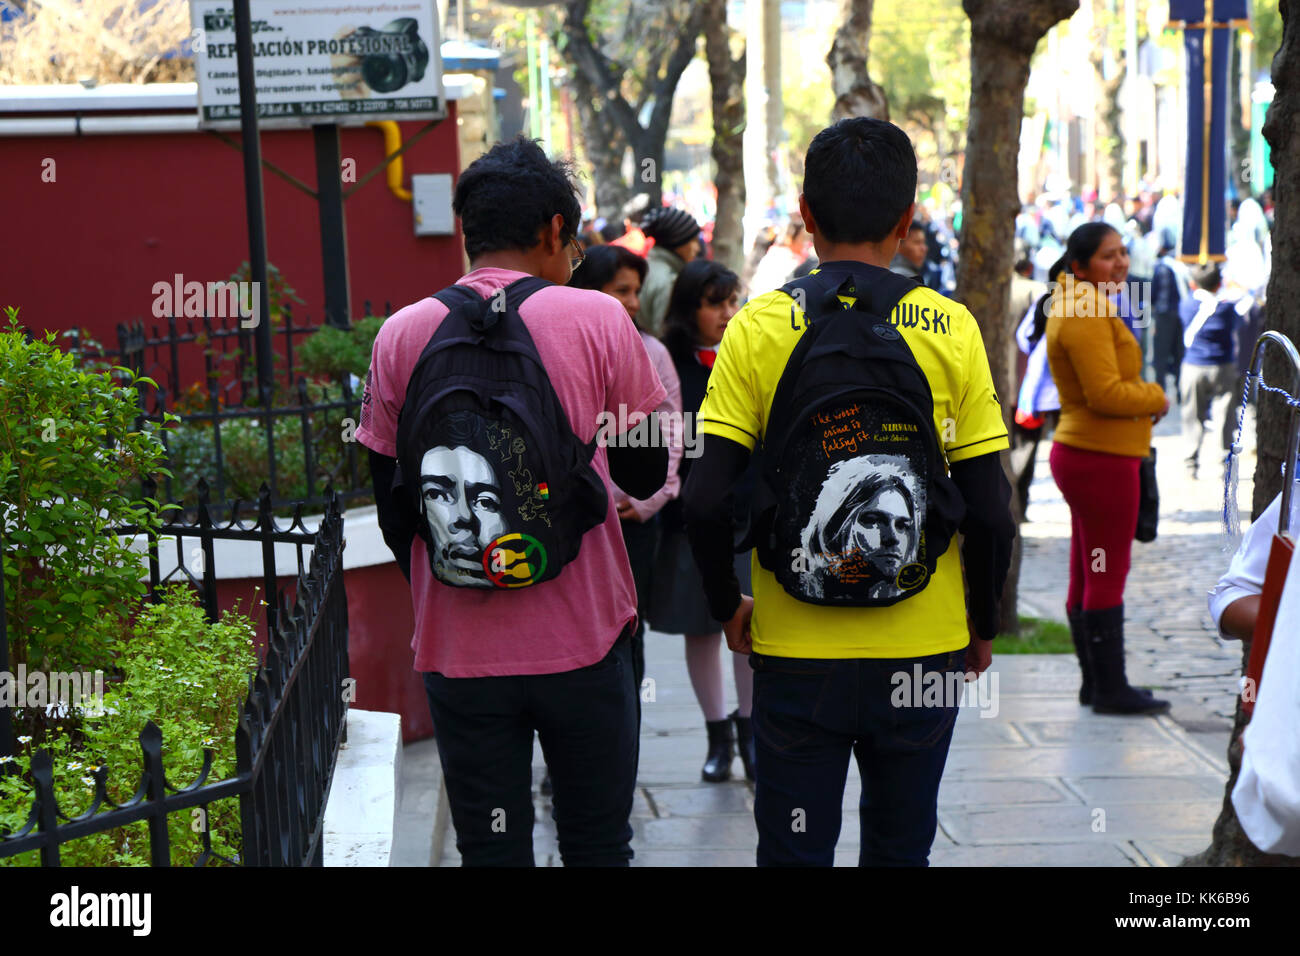 Youths wearing rucksacks with faces of Jimi Hendrix (L) and Kurt Cobain (R) on them walking in street, La Paz, Bolivia Stock Photo